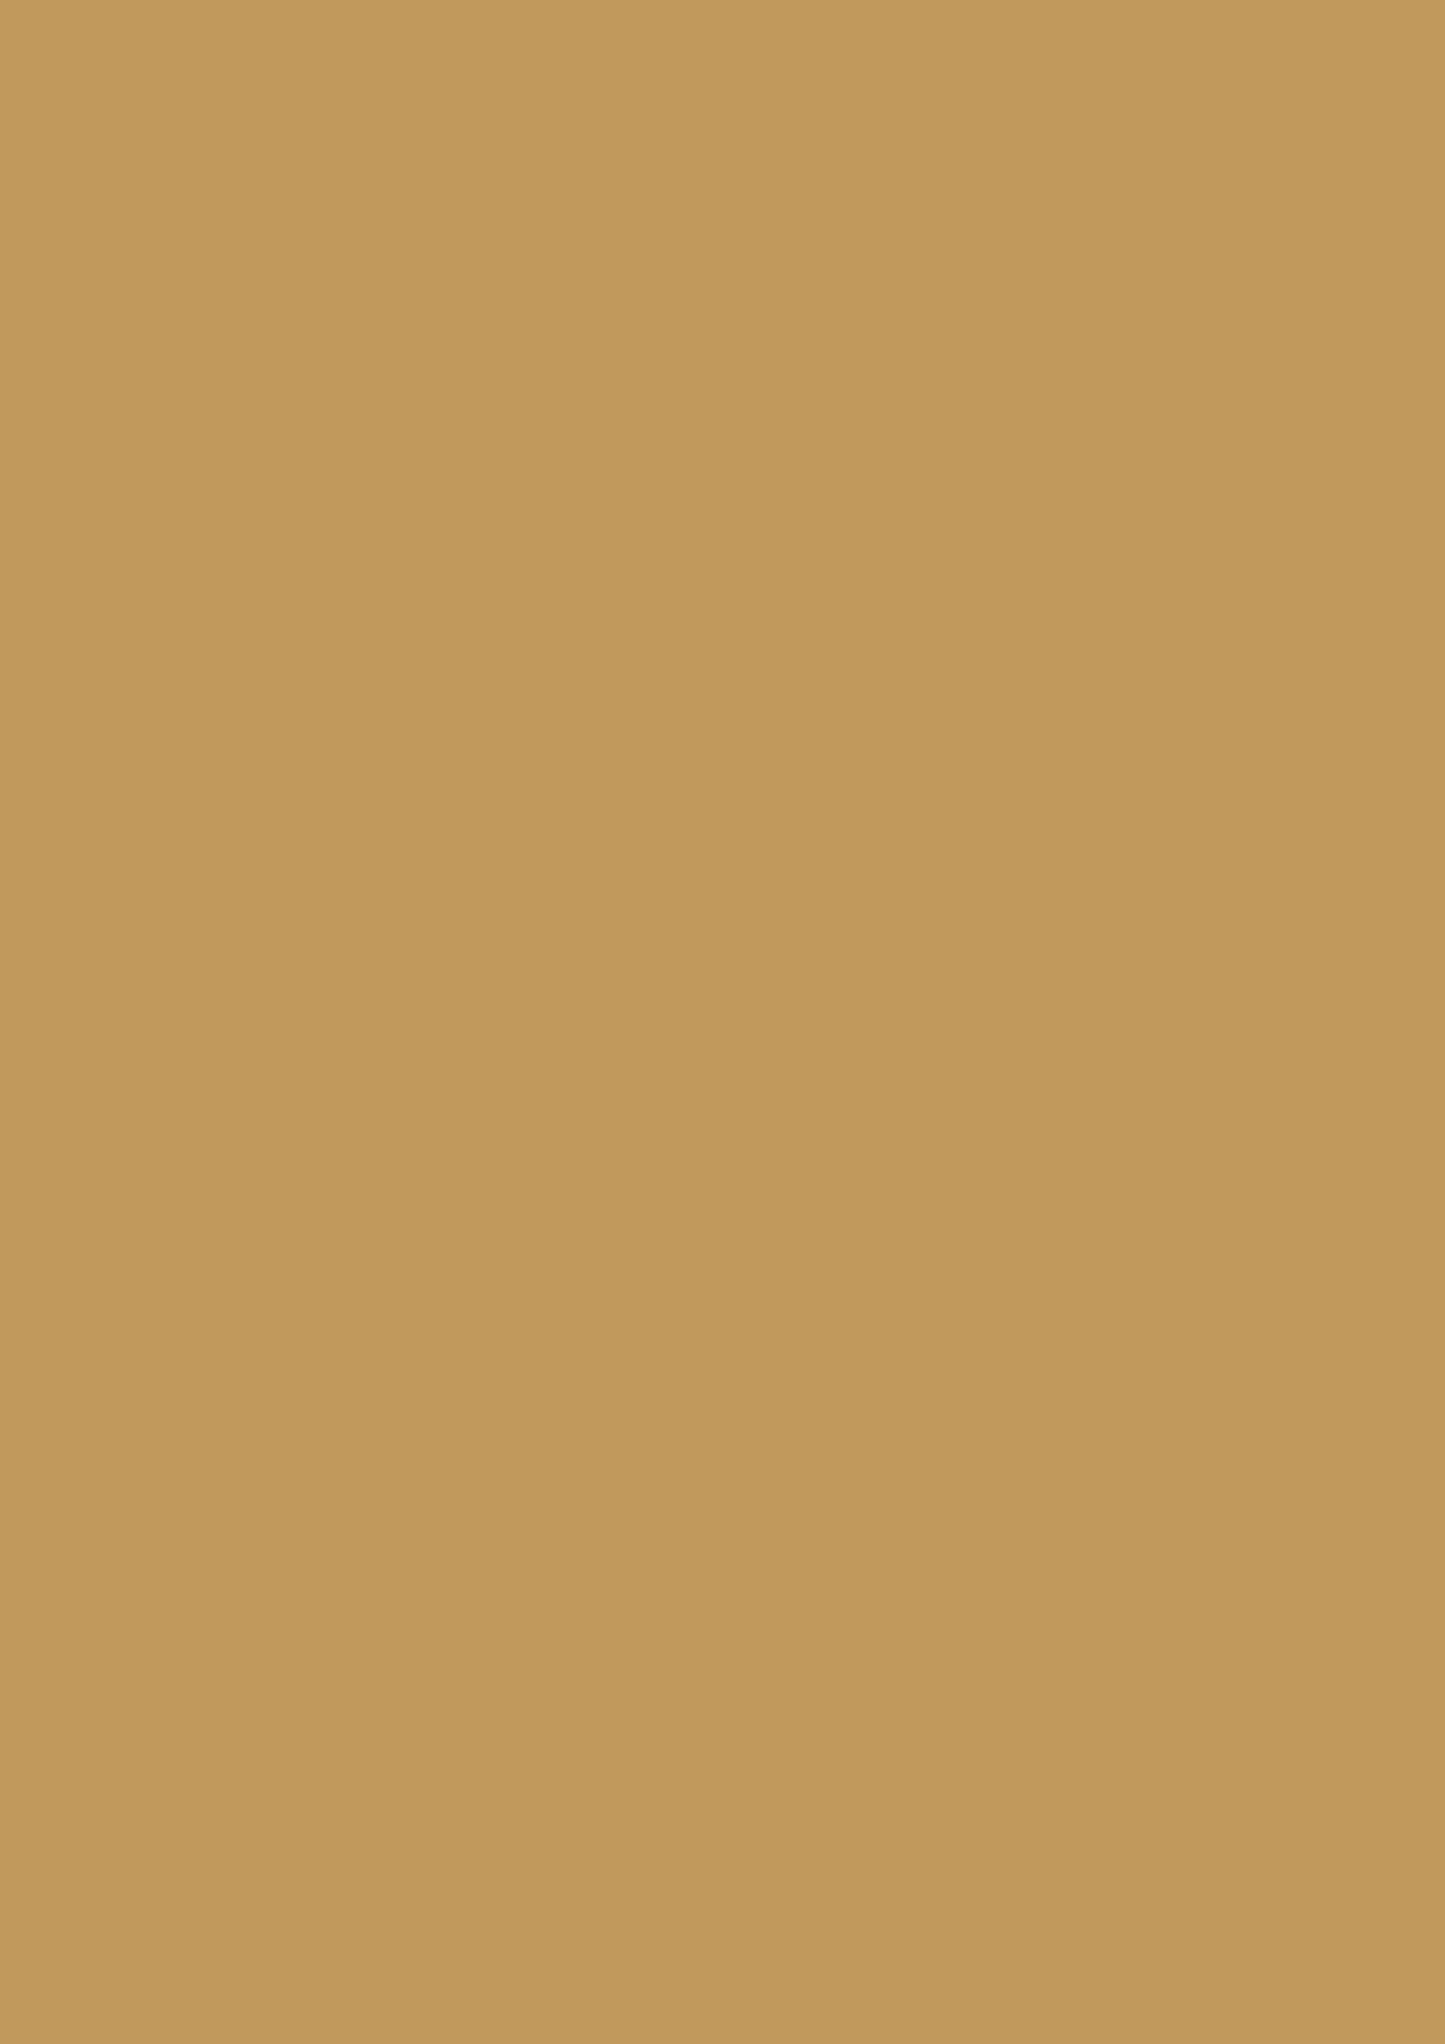 Dead Flat - Farrow and Ball - India Yellow 66 - Allround